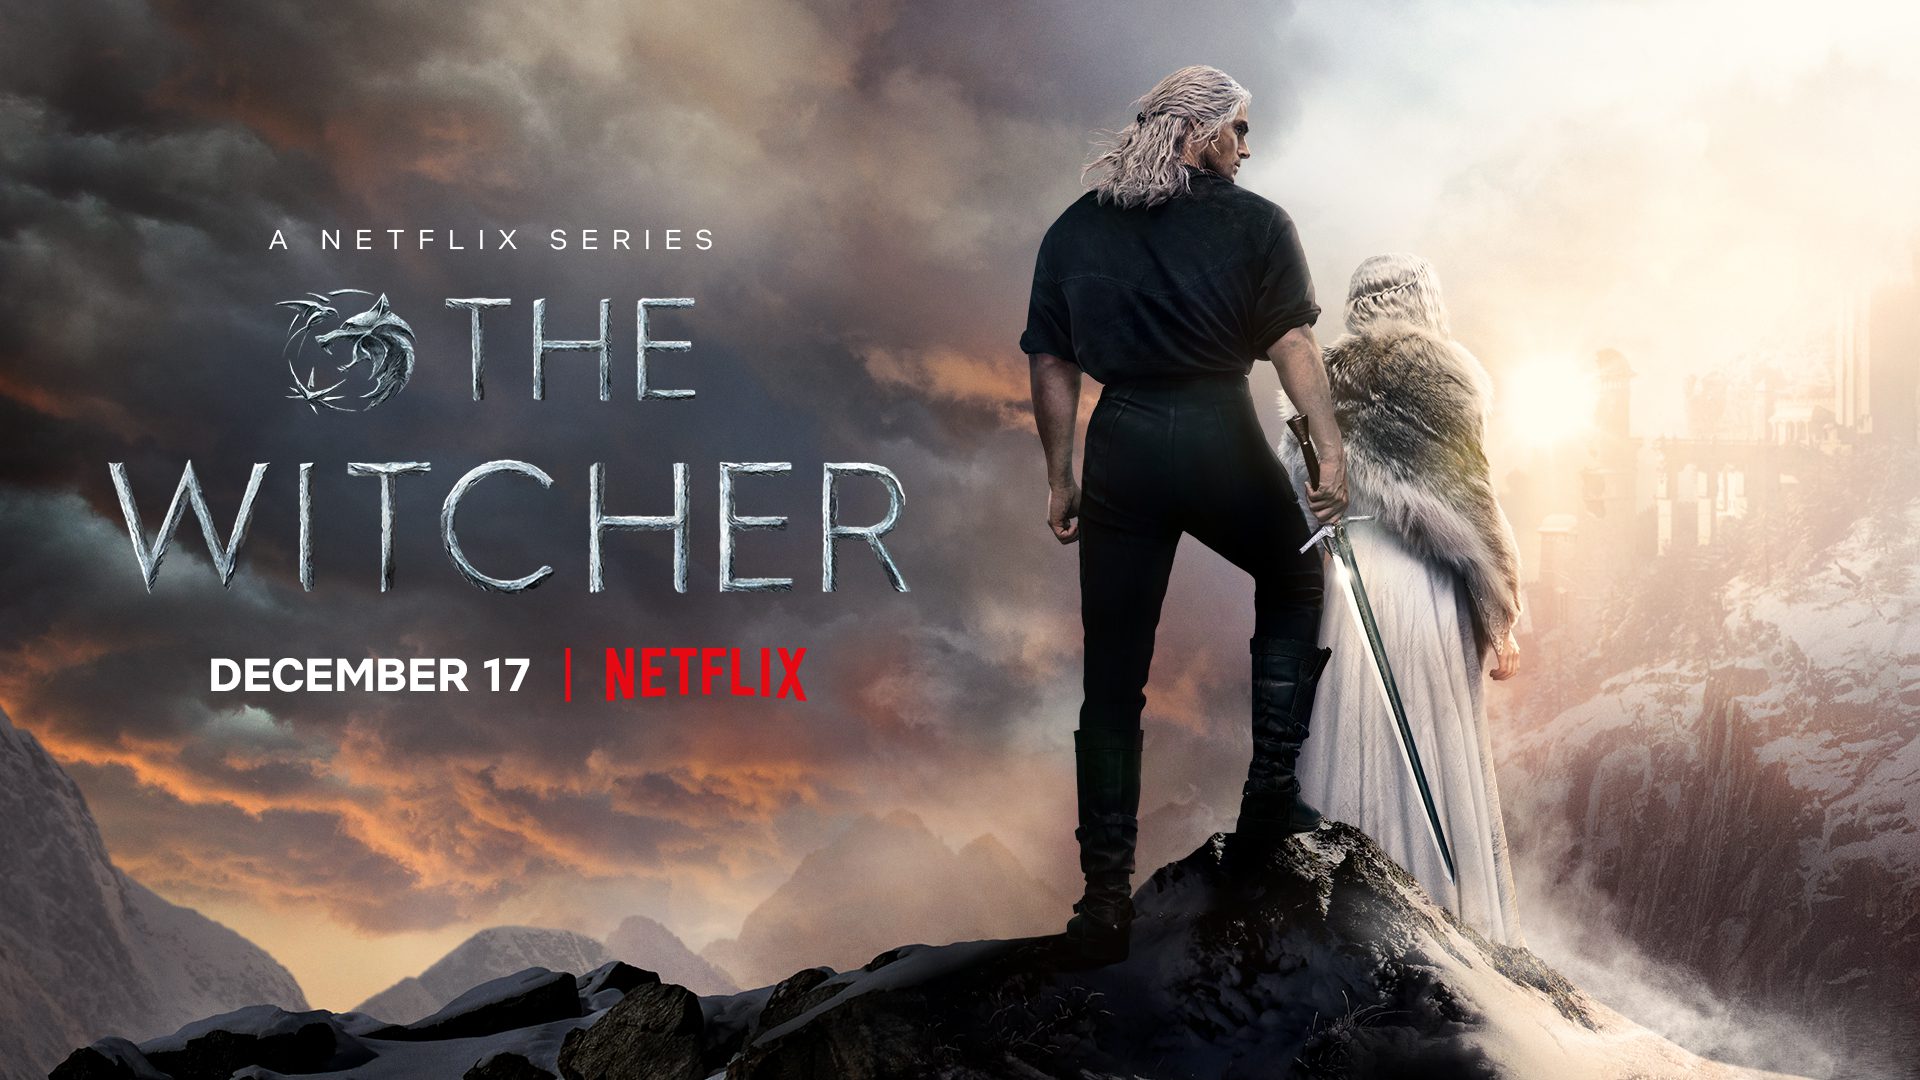 A promotional image for The Witcher season two